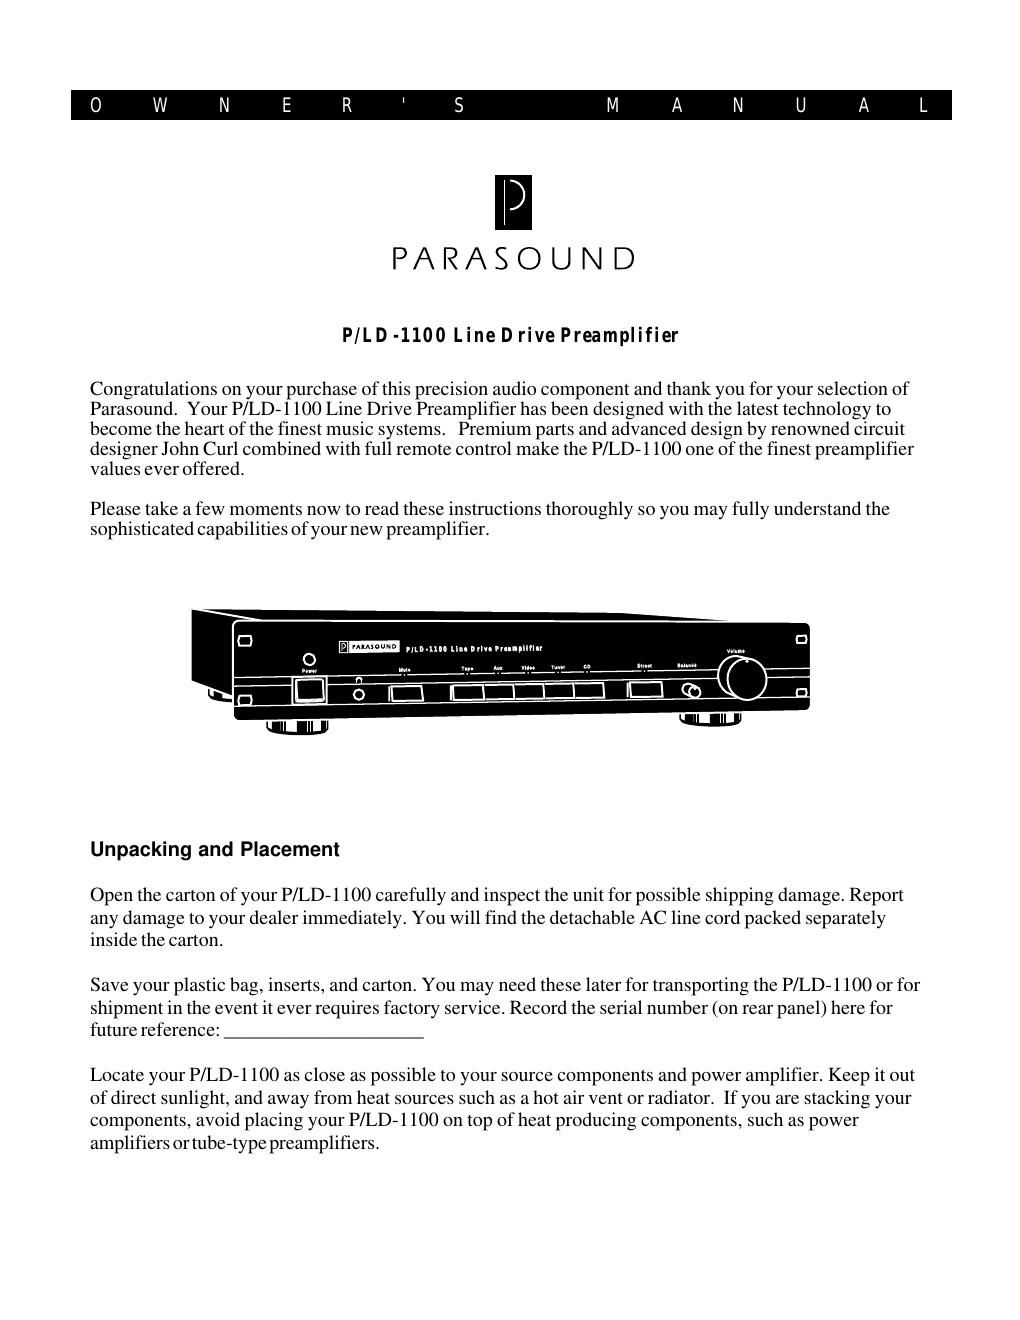 parasound pld 1100 owners manual